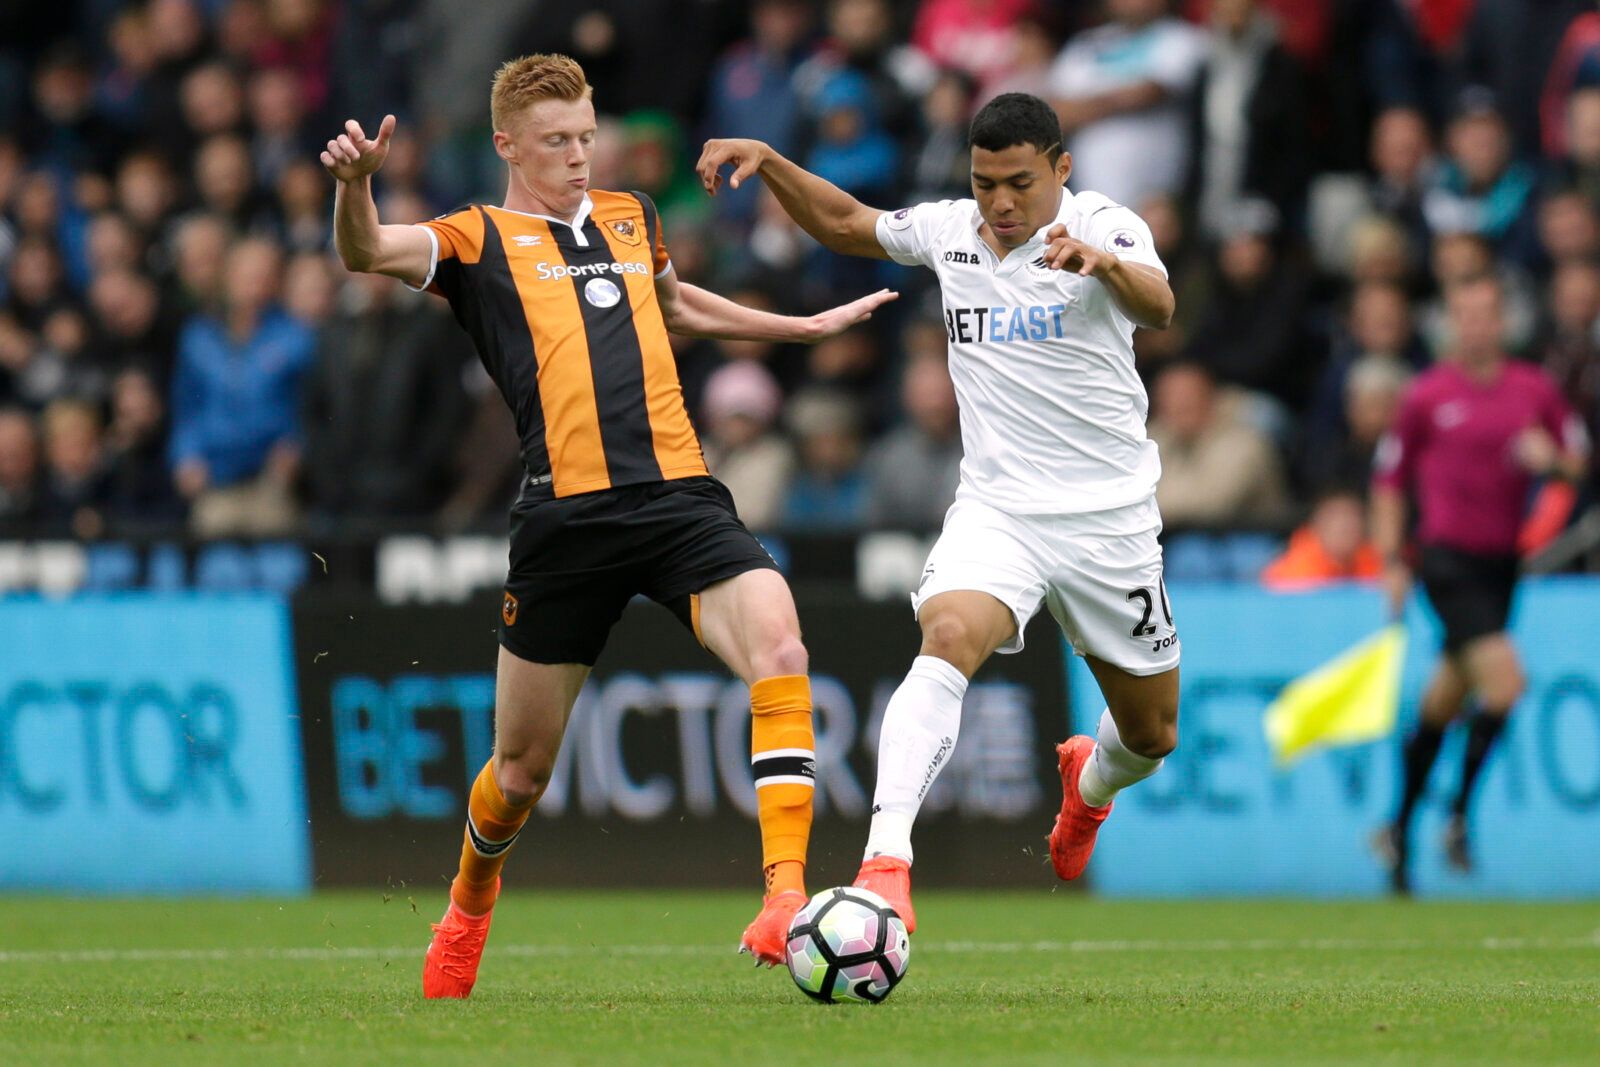 Britain Soccer Football - Swansea City v Hull City - Premier League - Liberty Stadium - 20/8/16 
Hull City's Sam Clucas (L) in action with Swansea City's Jefferson Montero  
Action Images via Reuters / Henry Browne 
Livepic 
EDITORIAL USE ONLY. No use with unauthorized audio, video, data, fixture lists, club/league logos or 